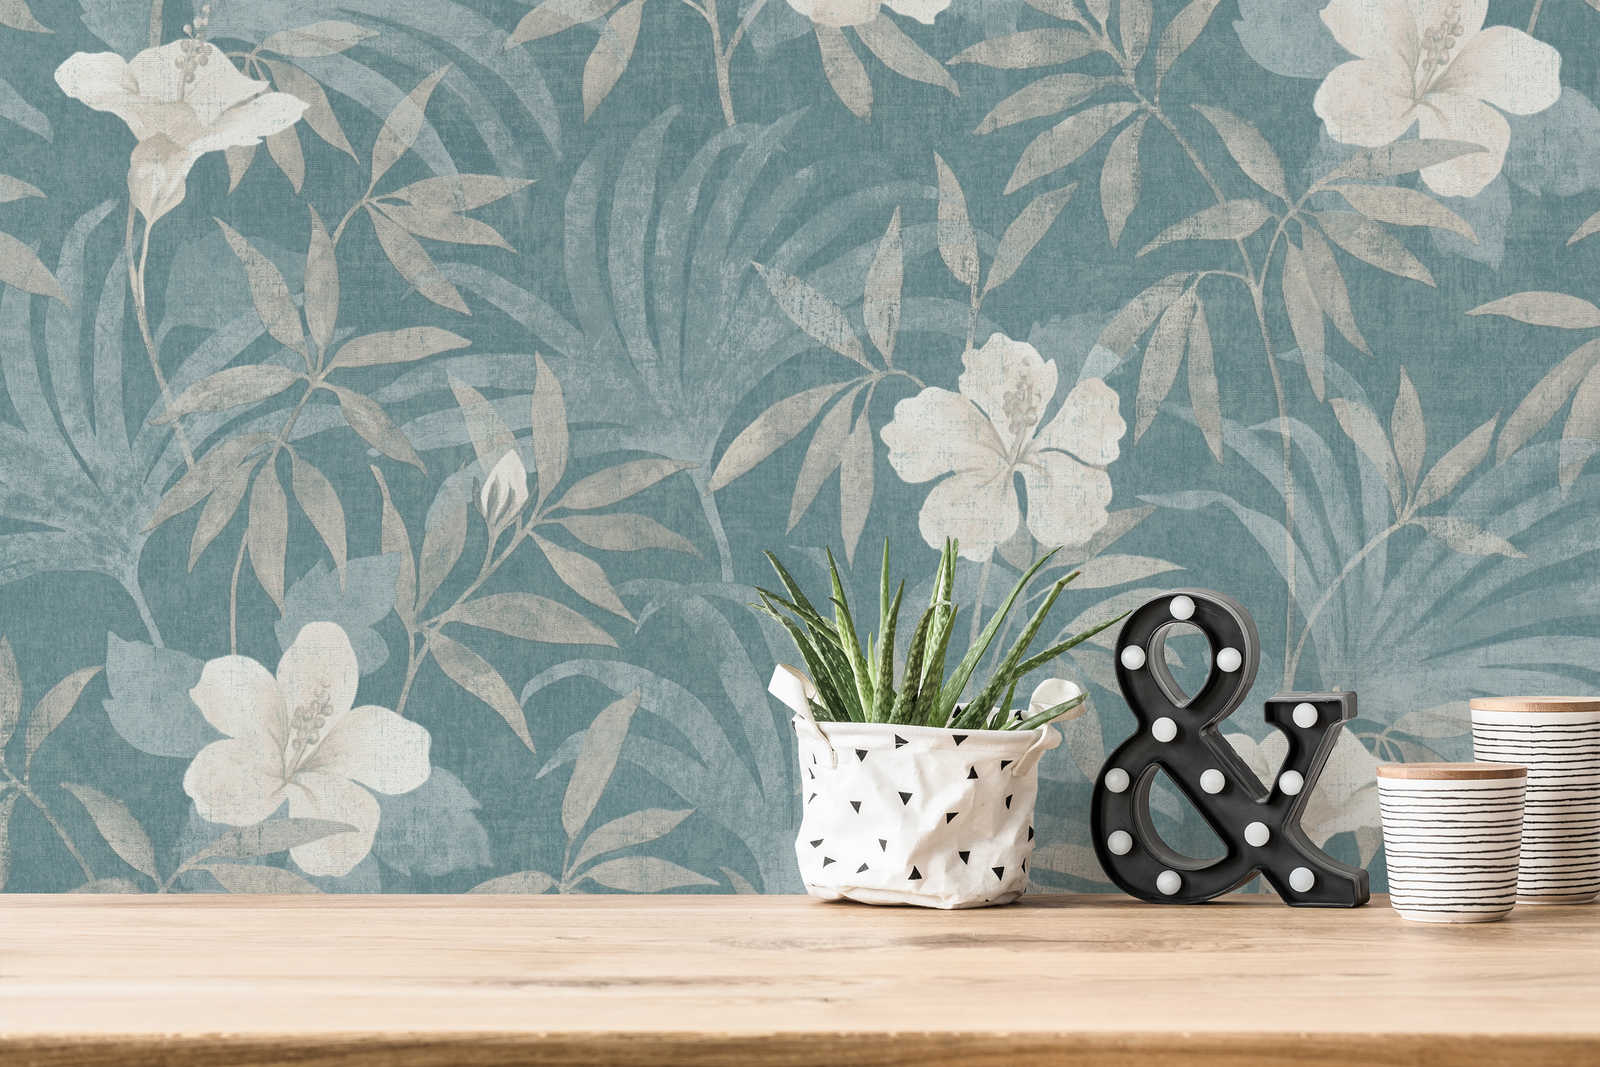             Wallpaper petrol jungle pattern with hibiscus flowers - beige, blue
        